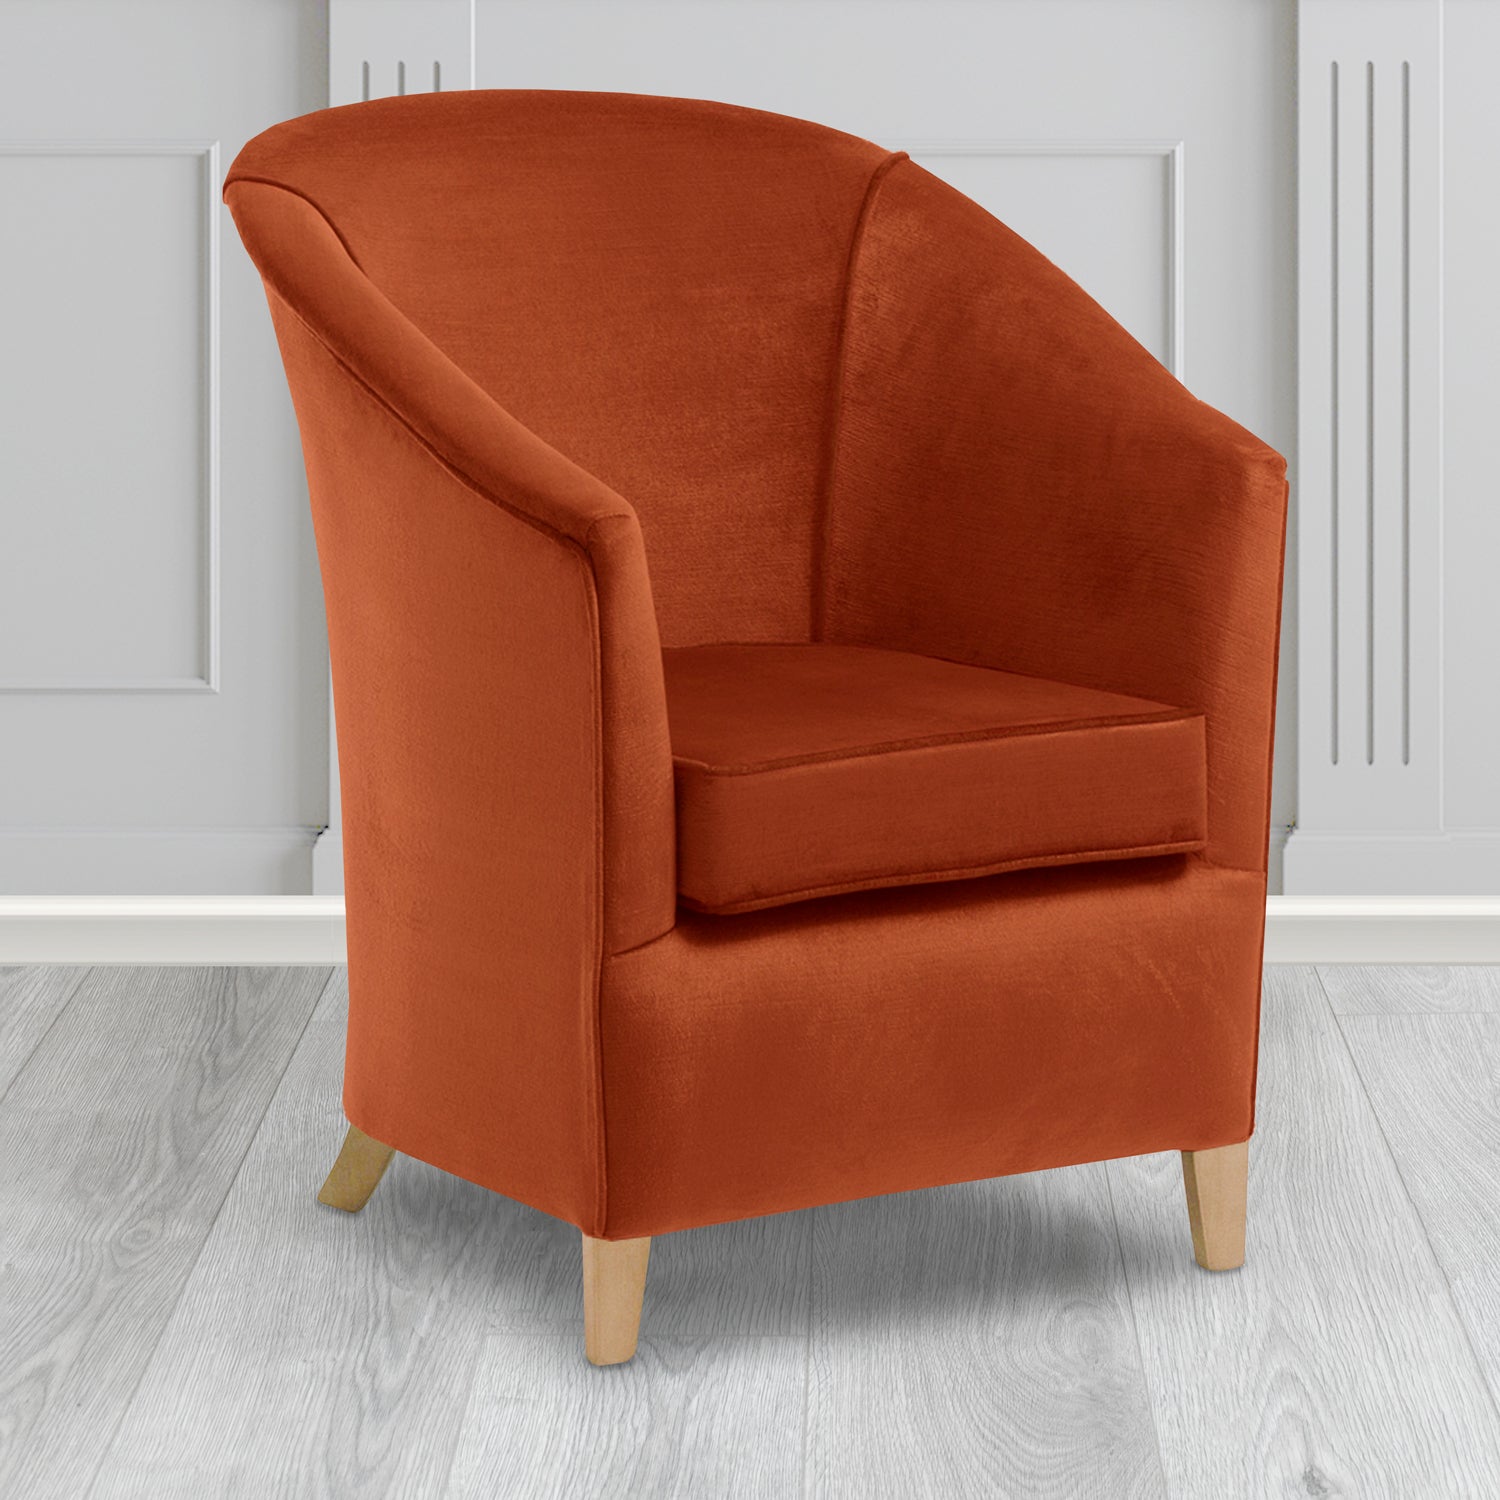 Bolton Tub Chair in Noble 404 Henna Crib 5 Velvet Fabric - Water Resistant - The Tub Chair Shop